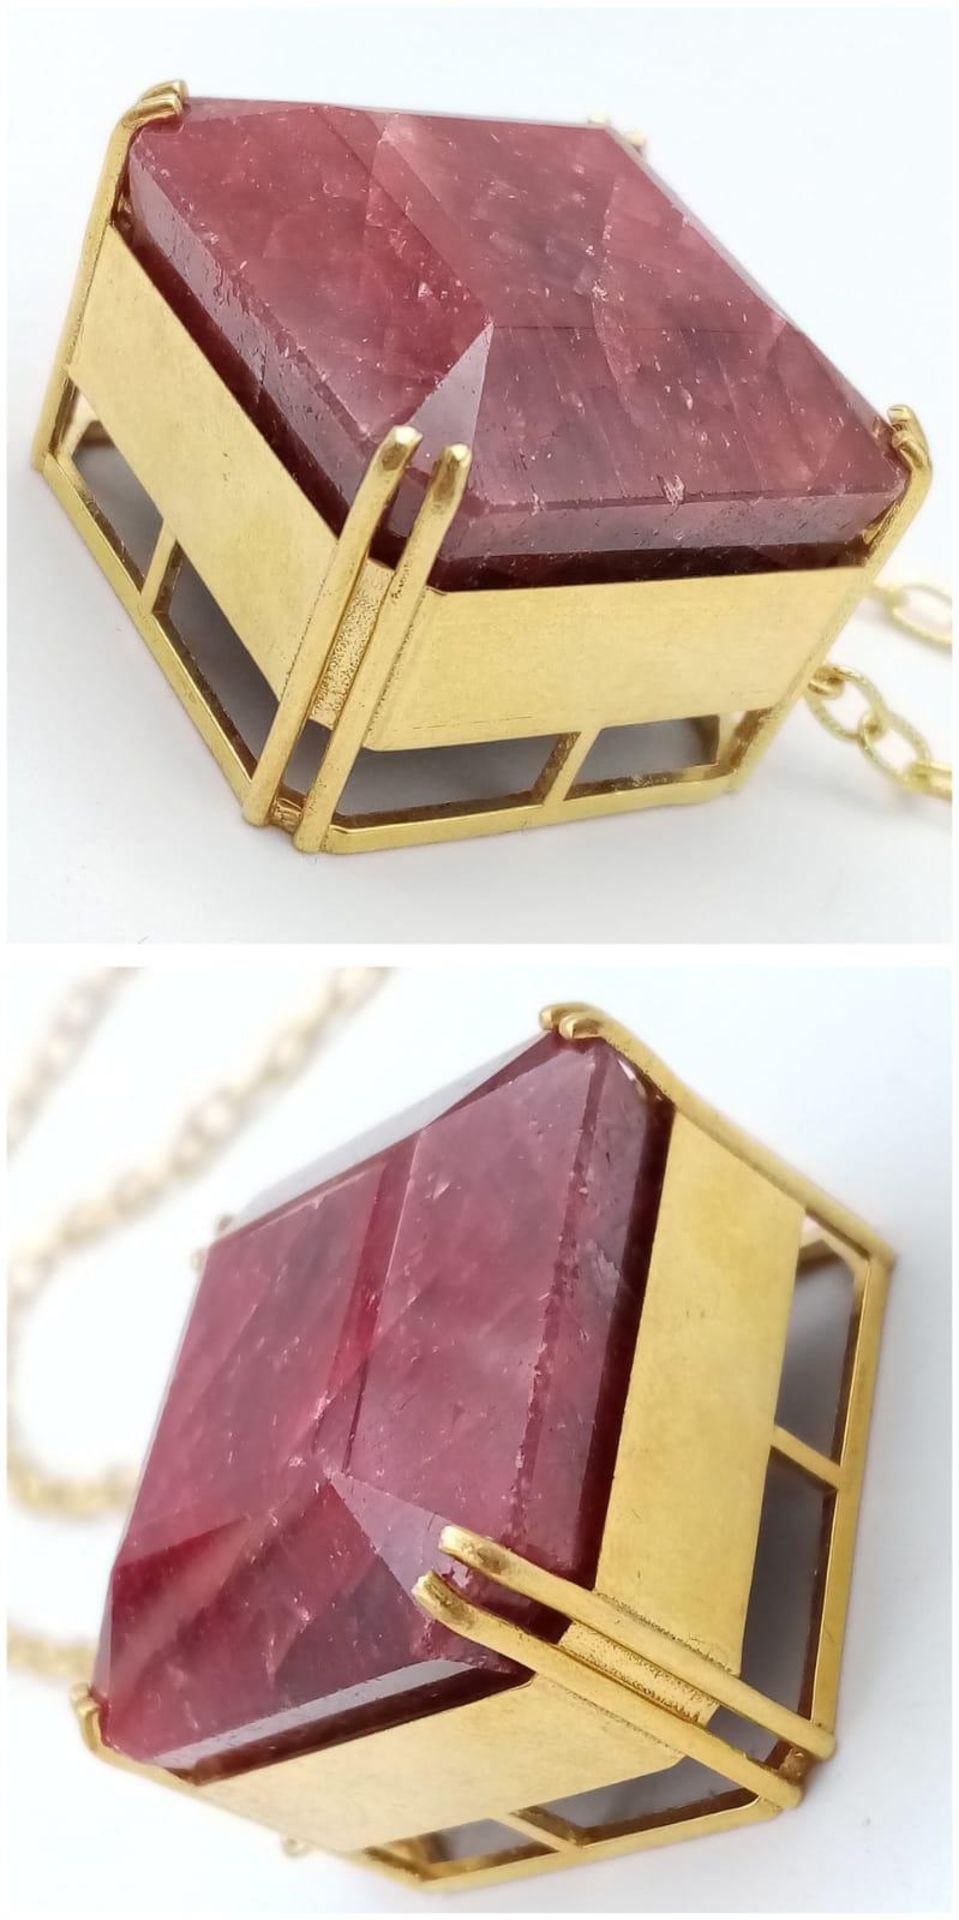 A Square-Cut 237ct Ruby Pendant in Gold Plated 925 Silver on a Gold Plated 925 Chain. Pendant 3cm - Image 3 of 9